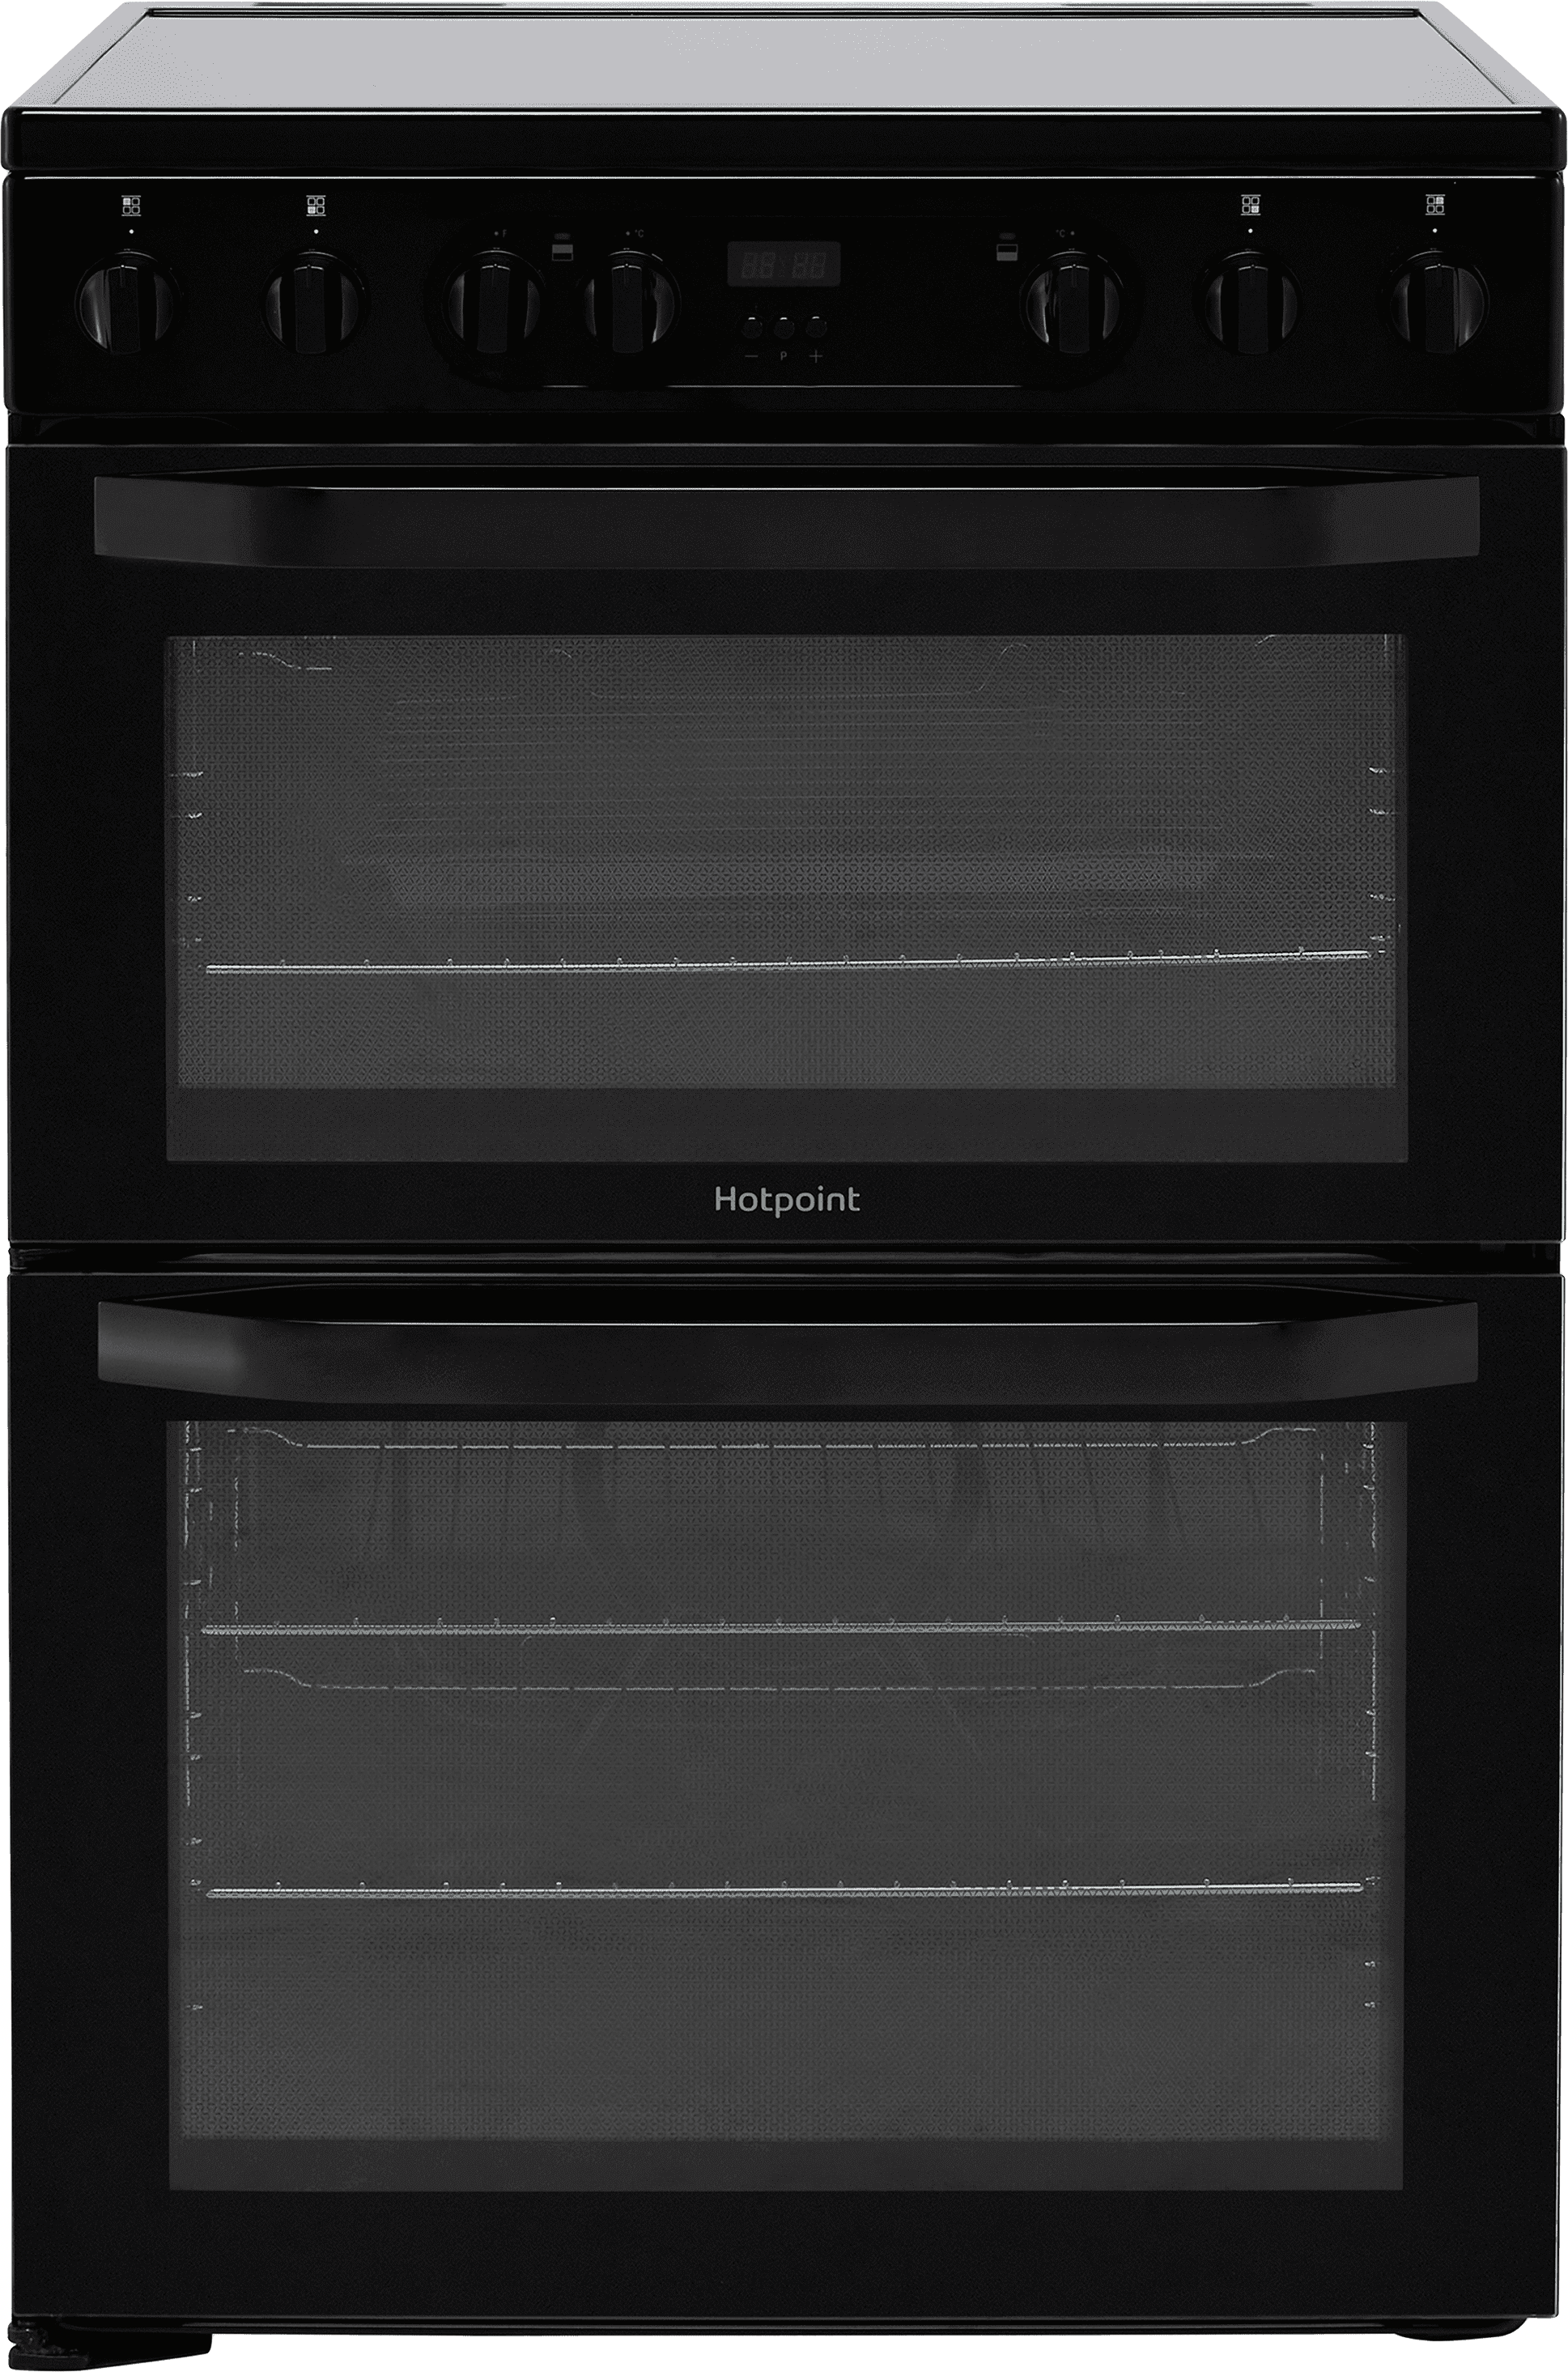 Hotpoint HDM67V9CMB/UK 60cm Electric Cooker with Ceramic Hob - Black - A/A Rated, Black